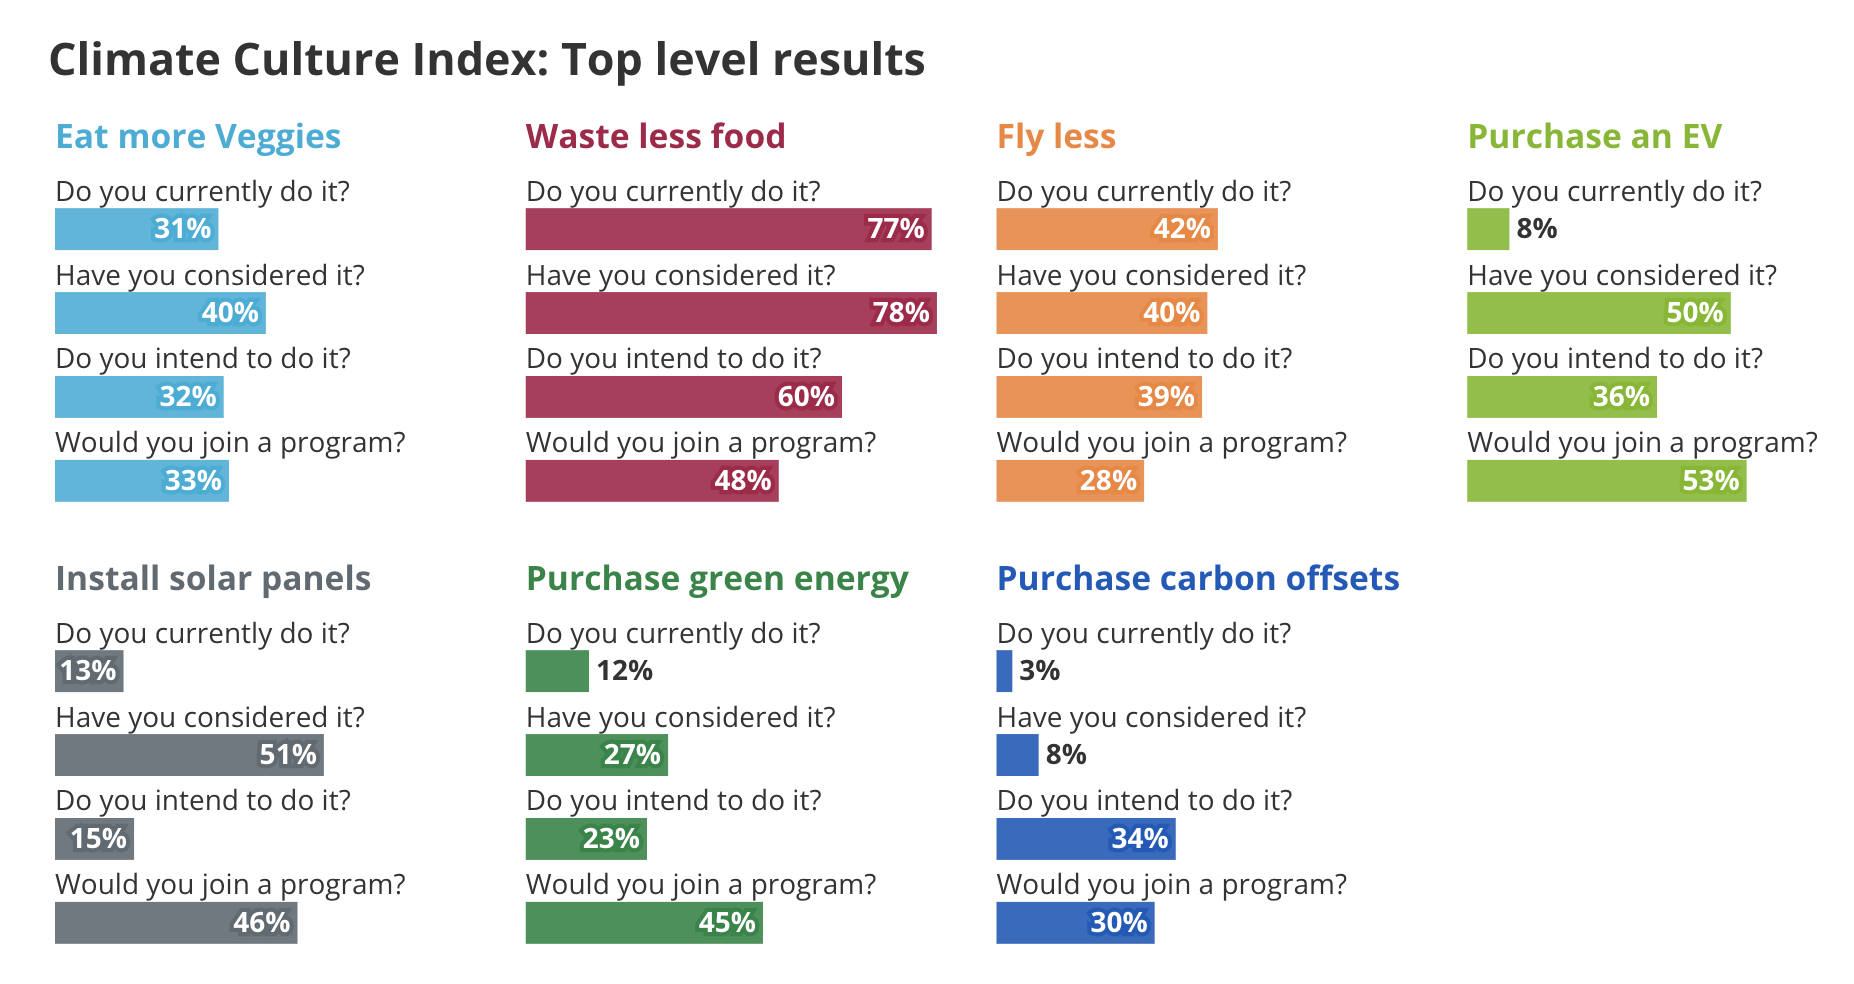 A chart created for RARE's Climate Culture Index project, showing the top level results across the seven behaviors modeled in the study.